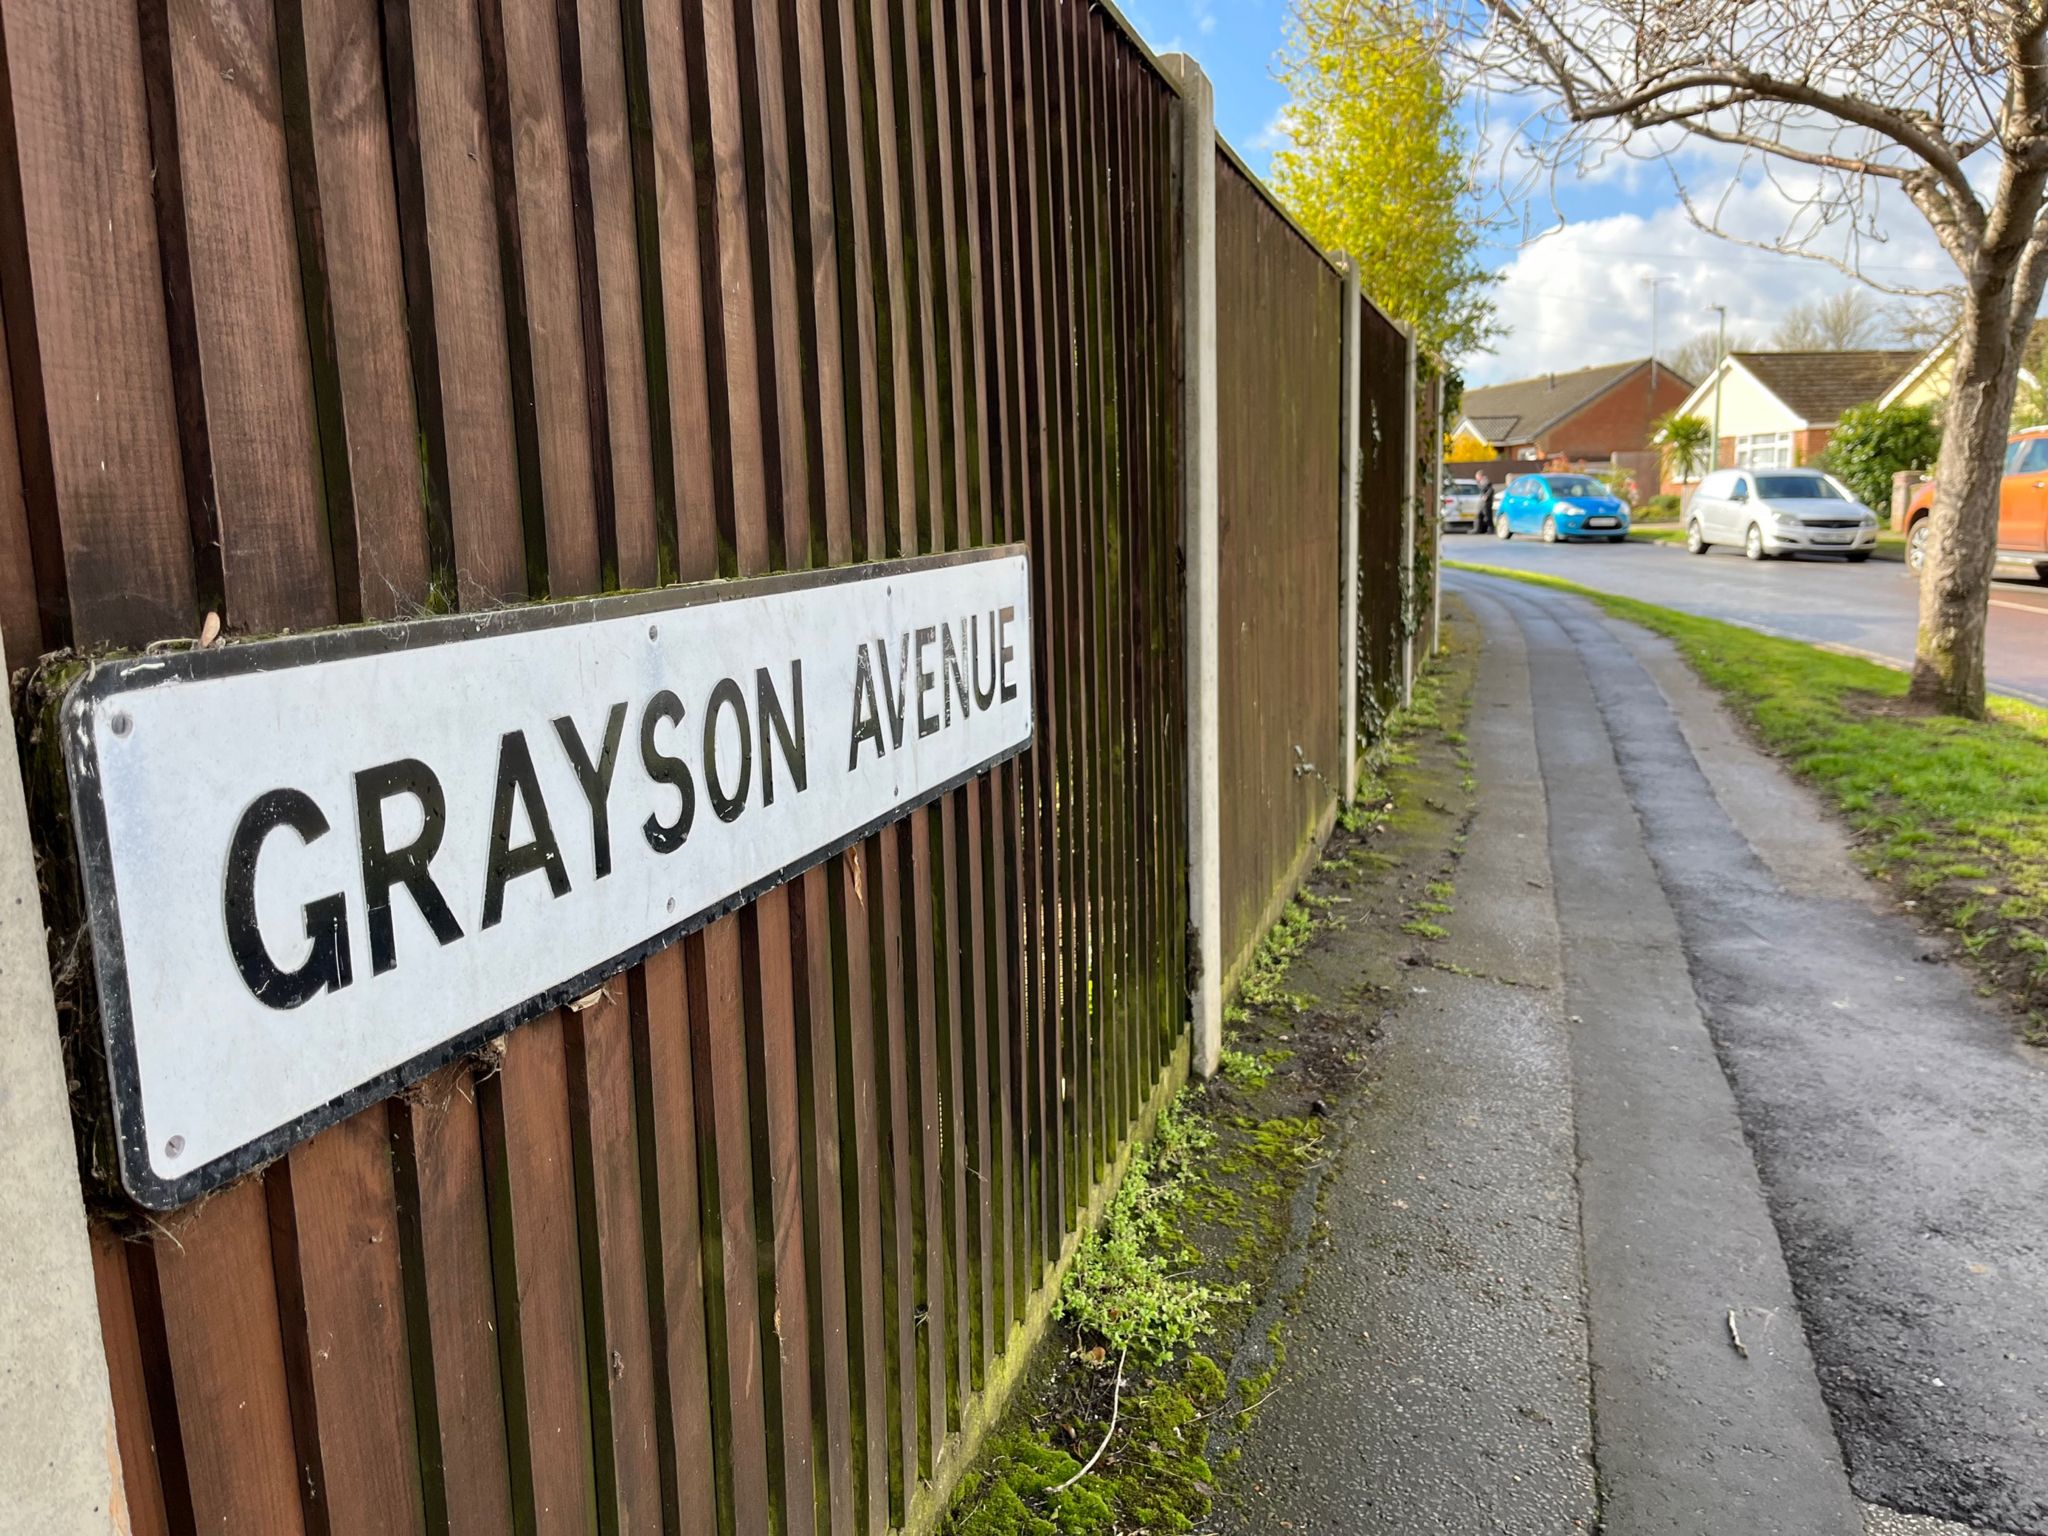 The road sign for Grayson Avenue, Pakefield, Suffolk